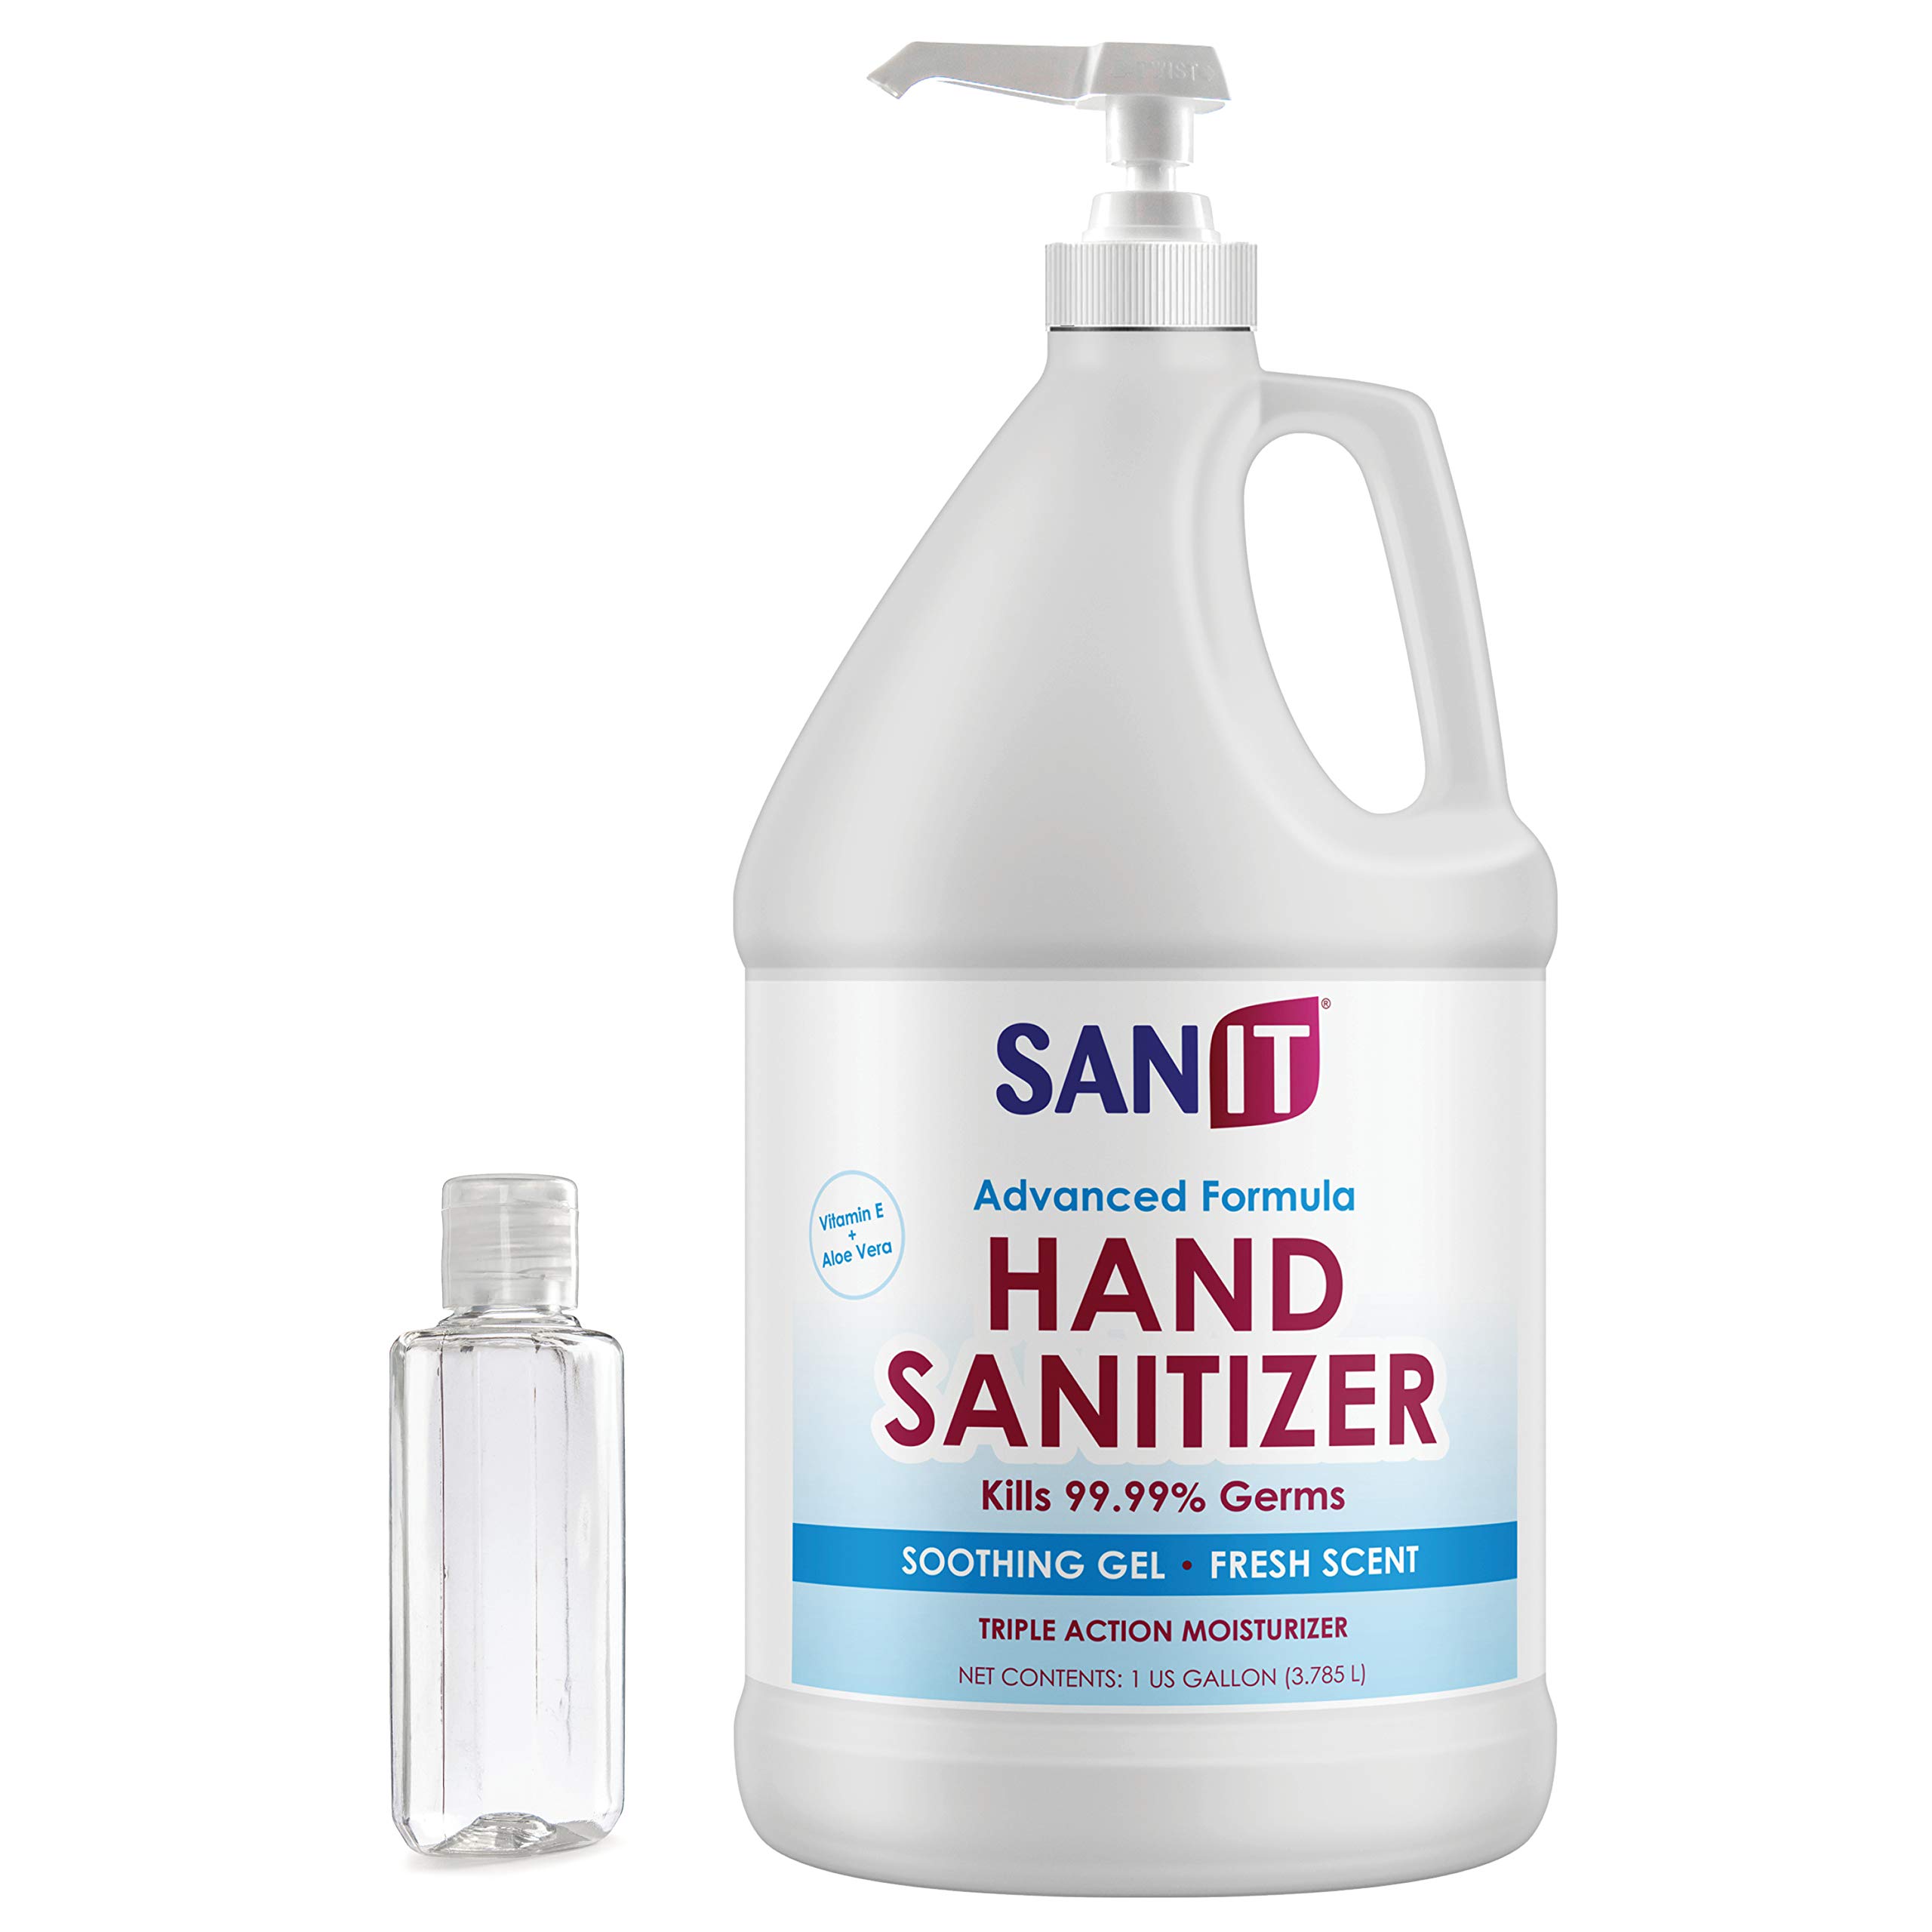 Sanit Moisturizing Hand Sanitizer Gel 70% Alcohol - Kills 99.99% Germs, Advanced Formula with Vitamin E and Aloe Vera - Soothing